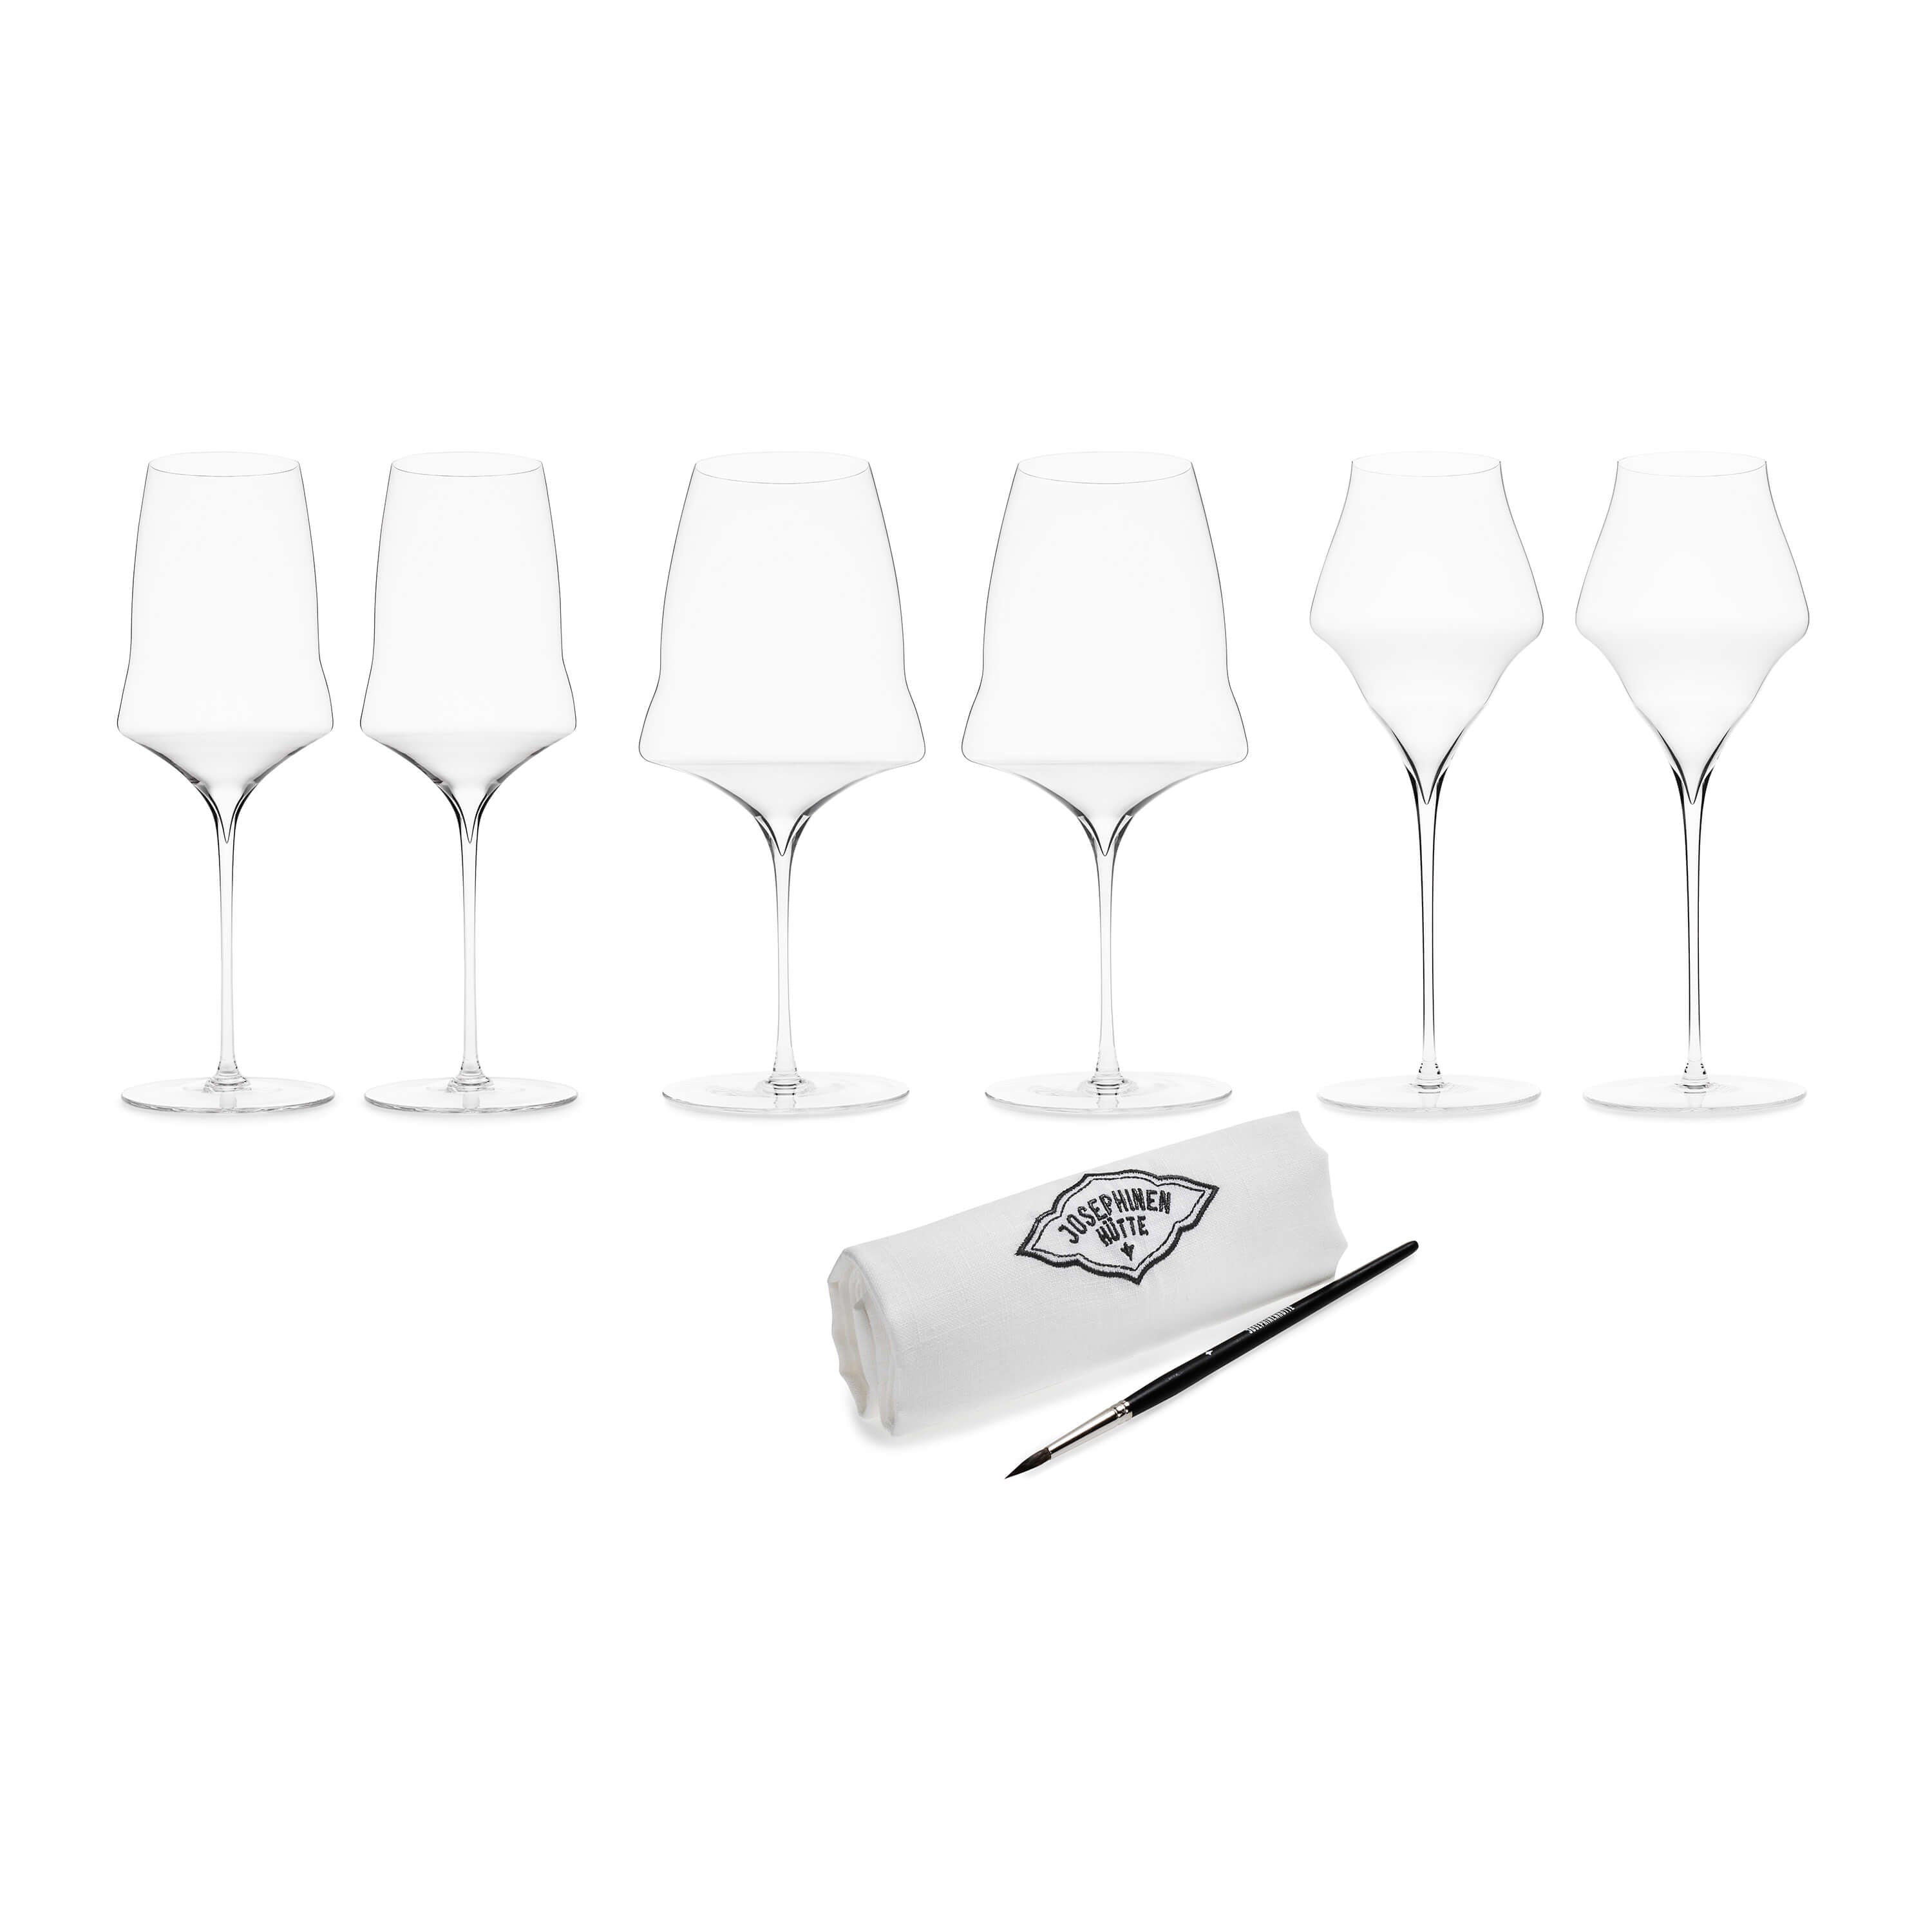 Two white wine glasses, two red wine glasses, two champagne glasses and brush and linen cloth by Josephinenhütte